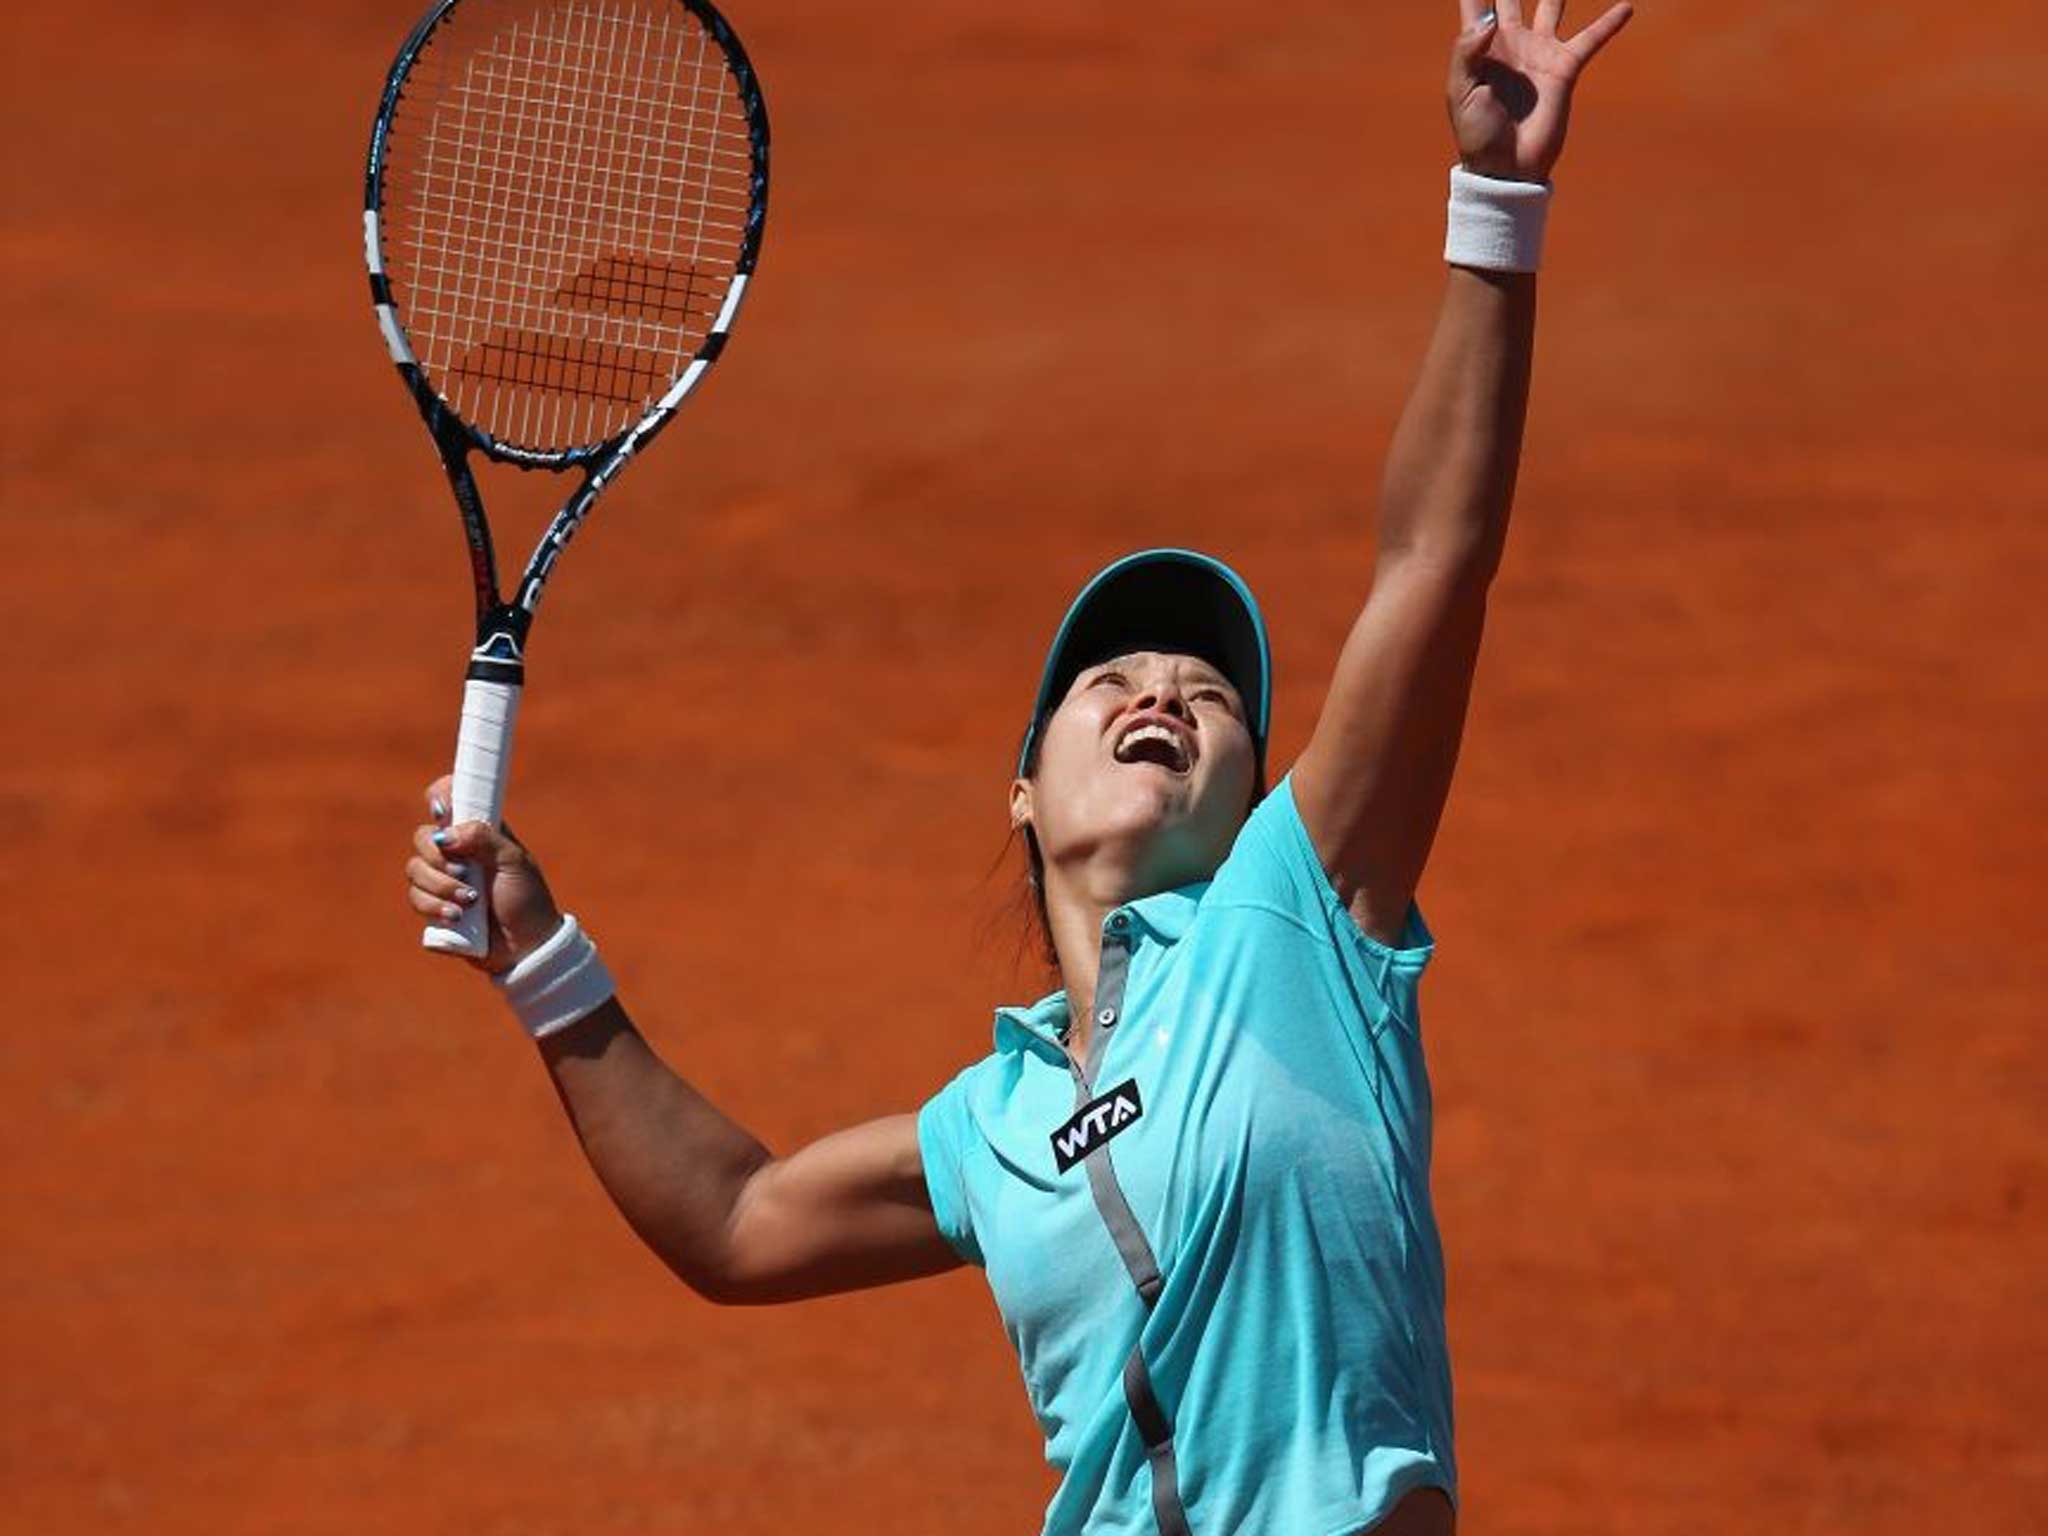 Hit maker: Li Na serves during the Rome Masters earlier this month. She reached the quarter-final at the Italian event